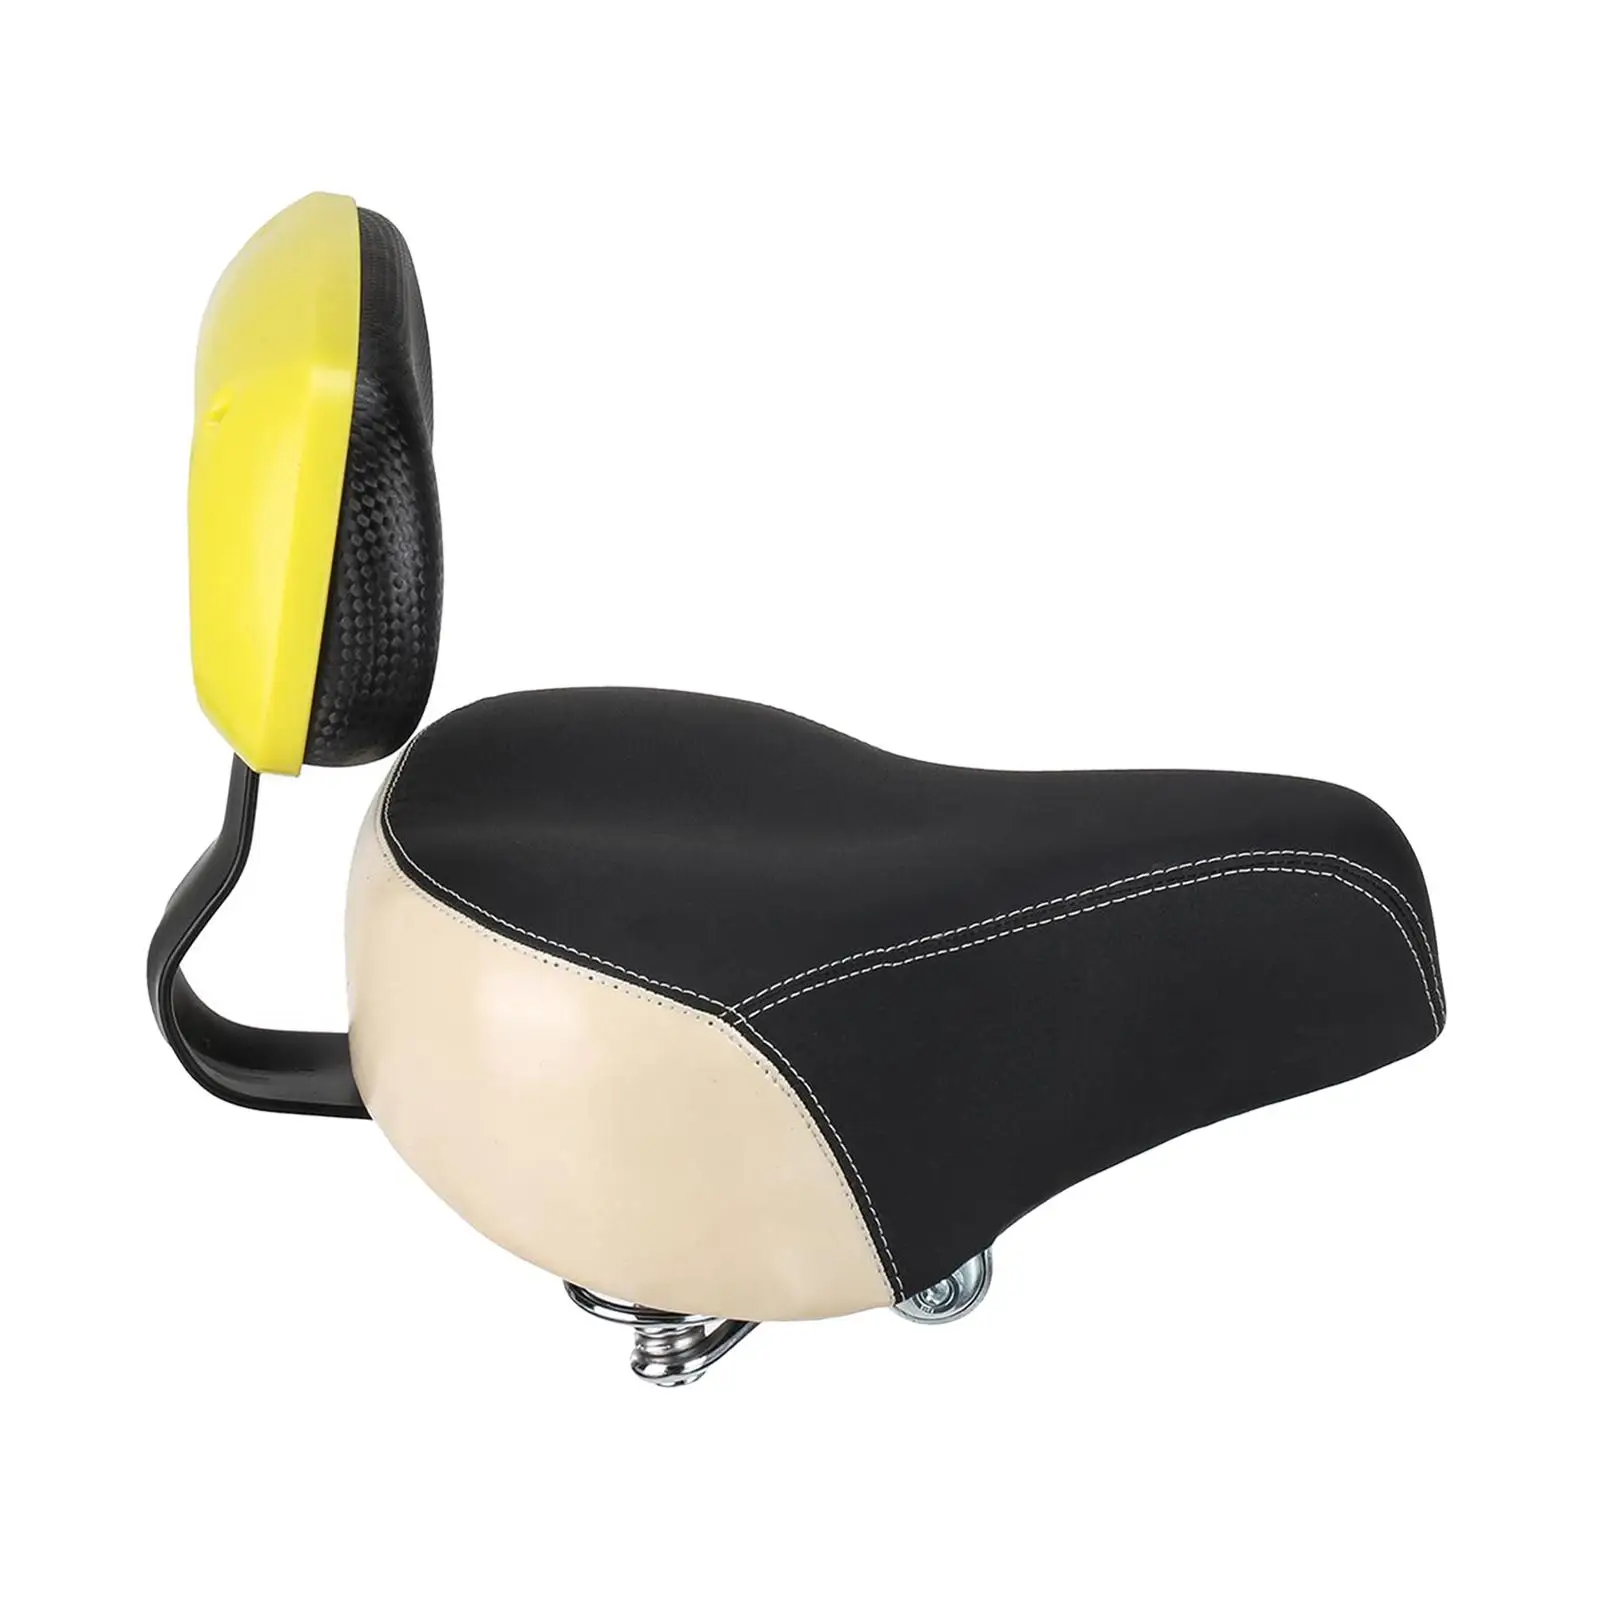 Comfortable Seat Saddle with Backrest Cover Seat Cushion for Men